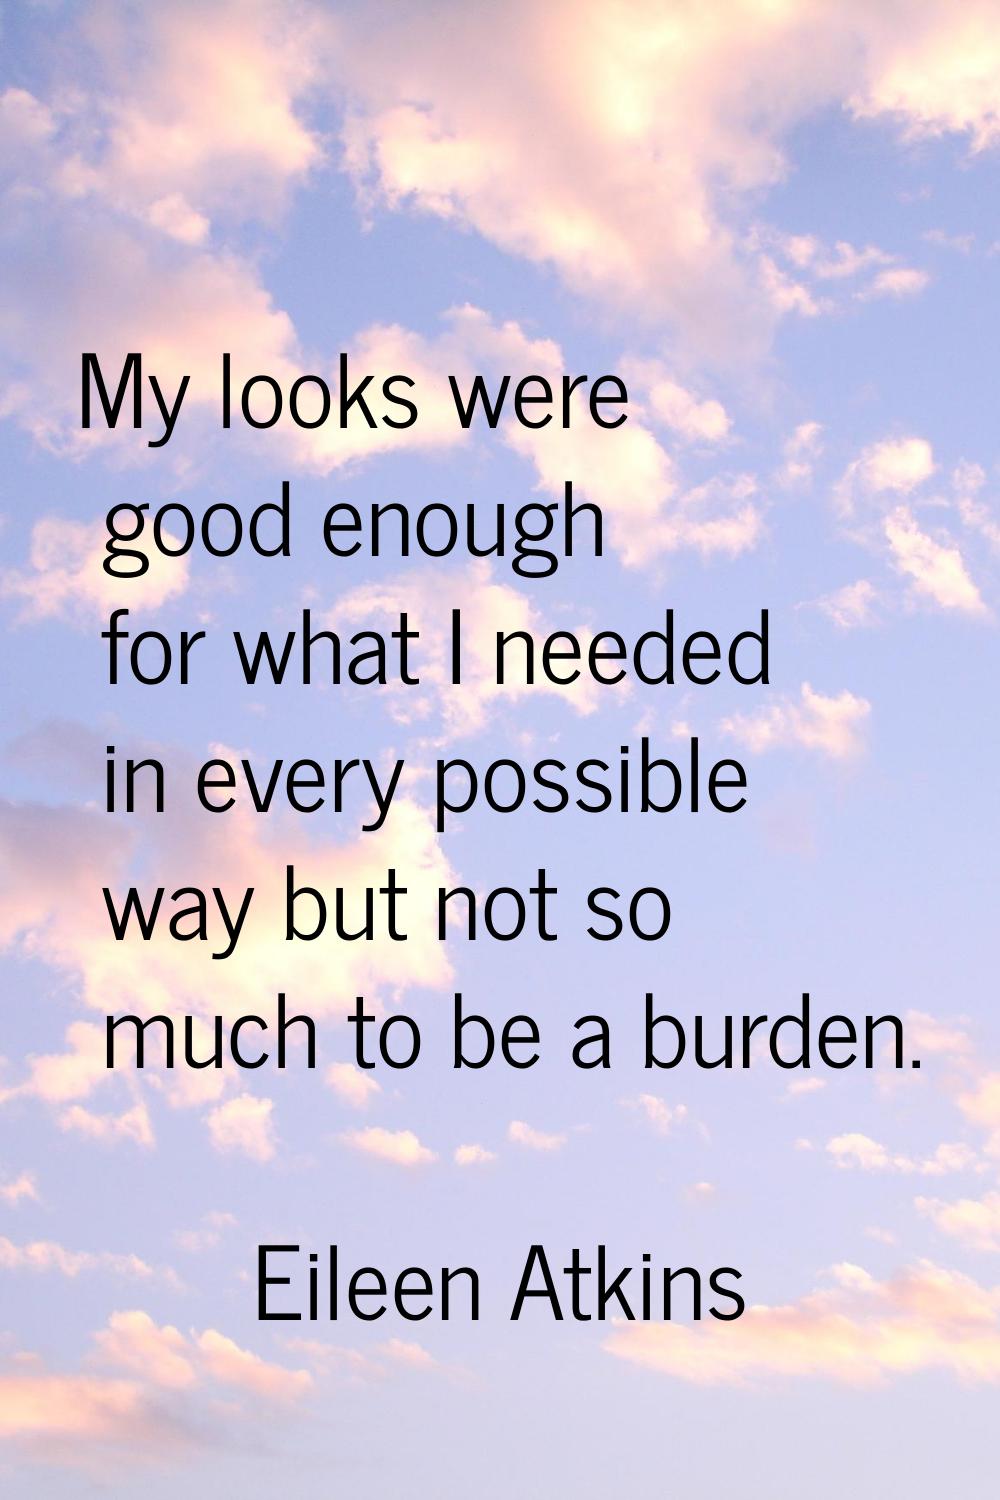 My looks were good enough for what I needed in every possible way but not so much to be a burden.